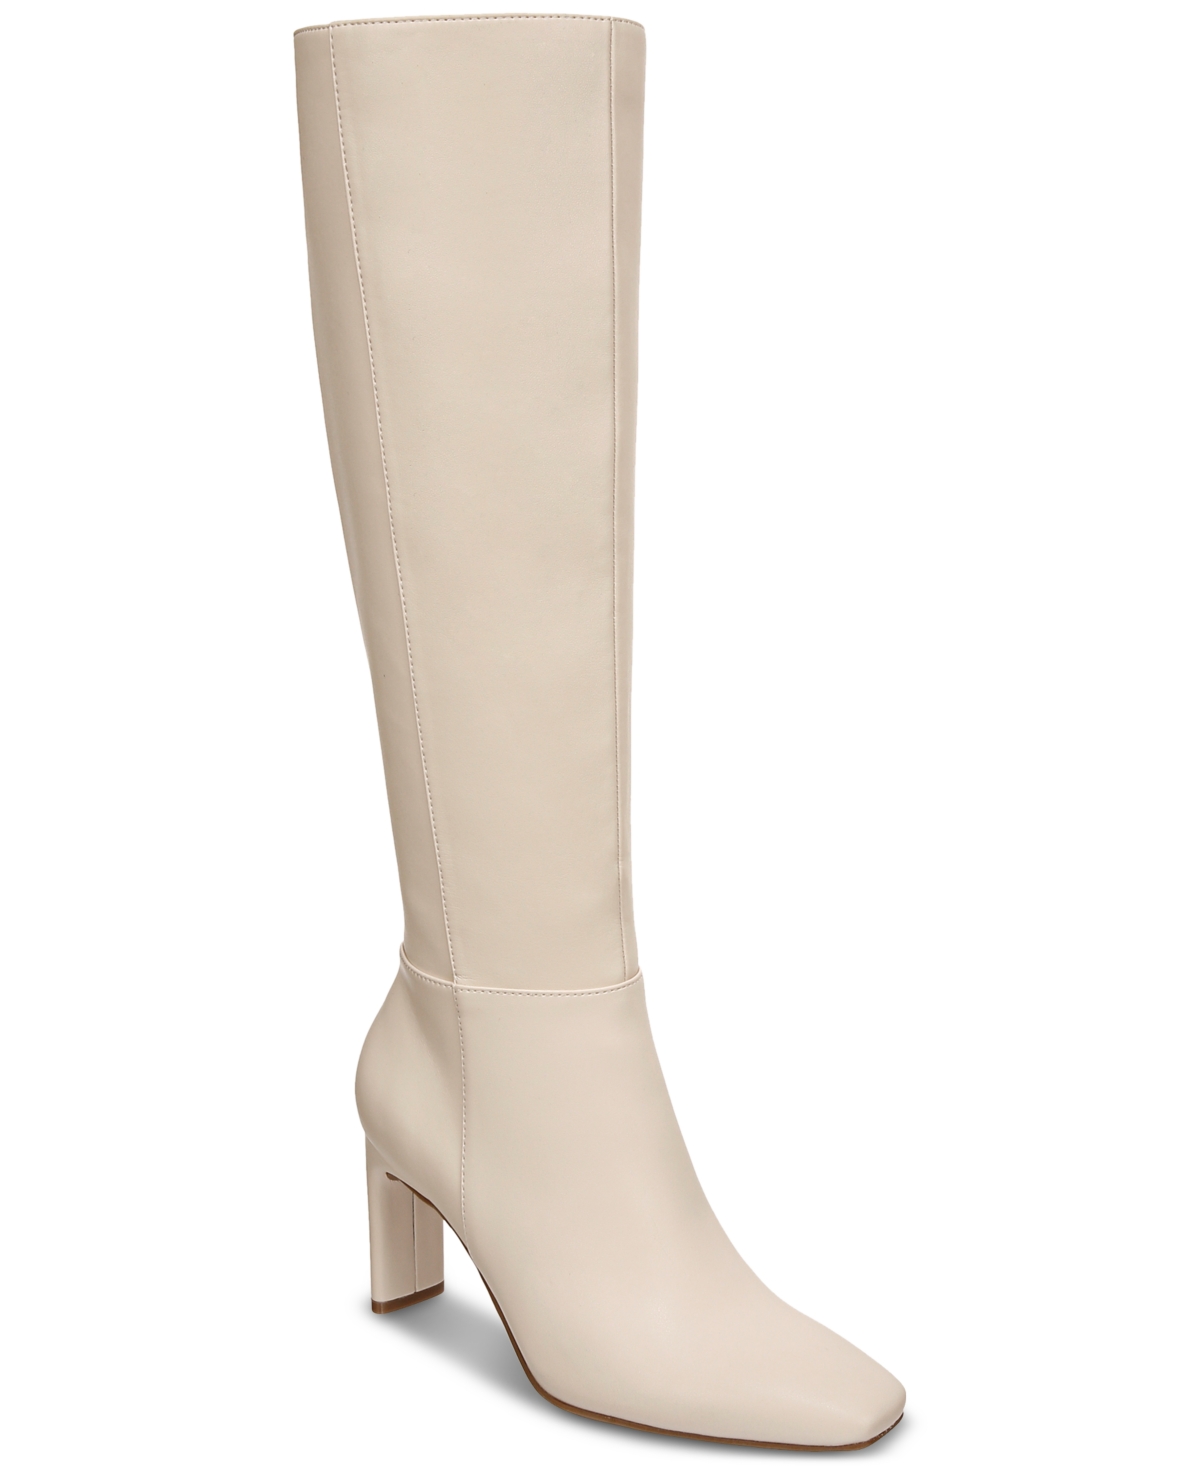 Women's Tristanne Wide-Calf Knee High Dress Boots, Created for Macy's - Bone Smooth WC